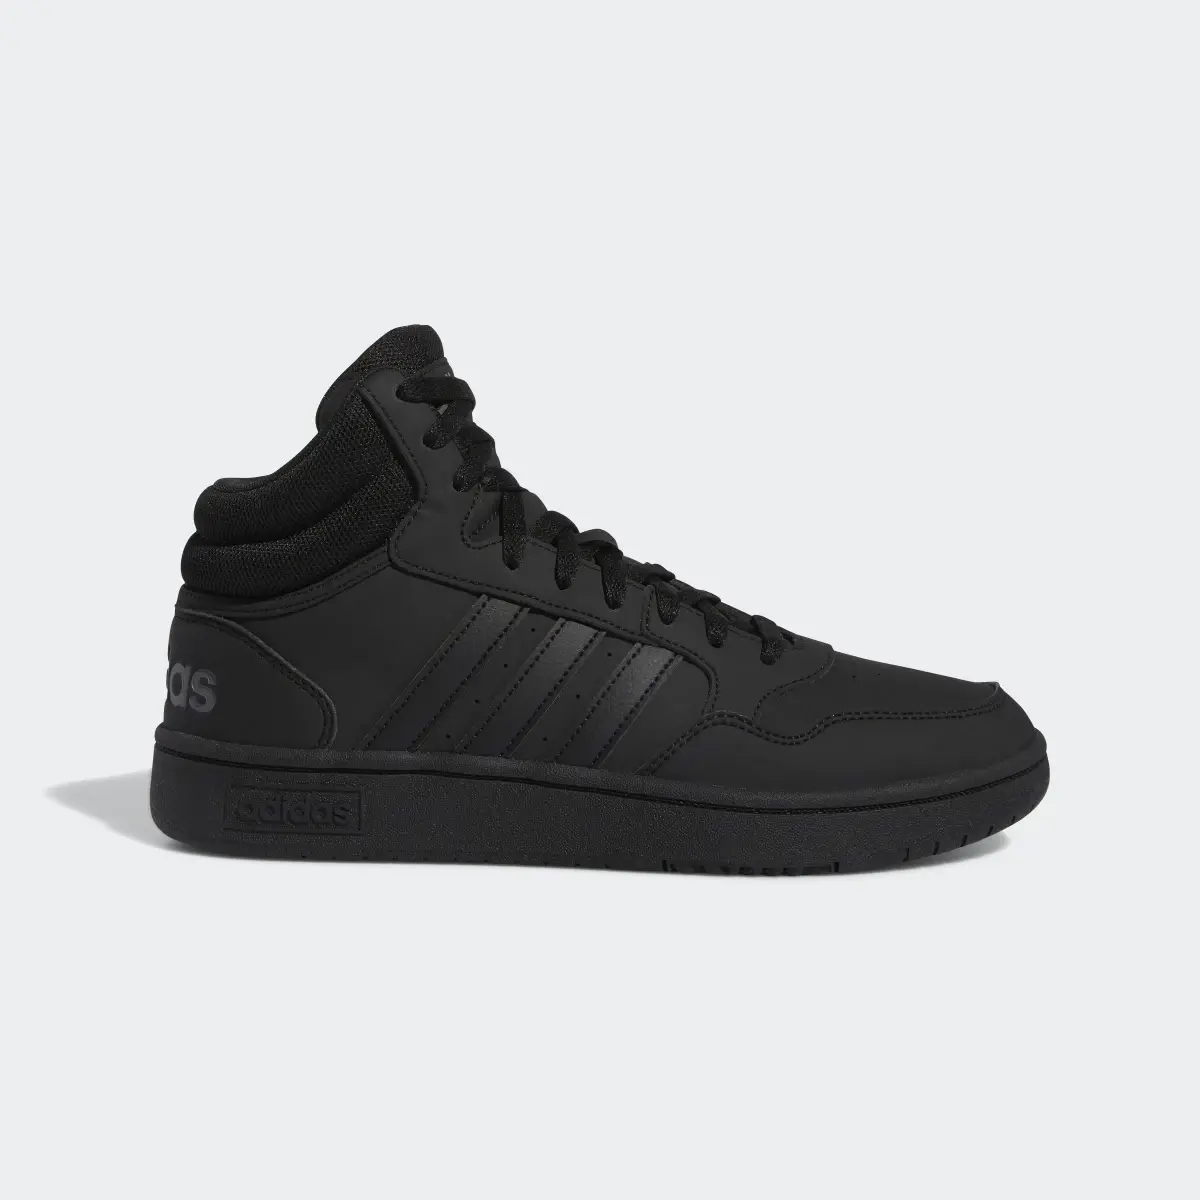 Adidas Chaussure Hoops 3 Mid Lifestyle Basketball Mid Classic. 2